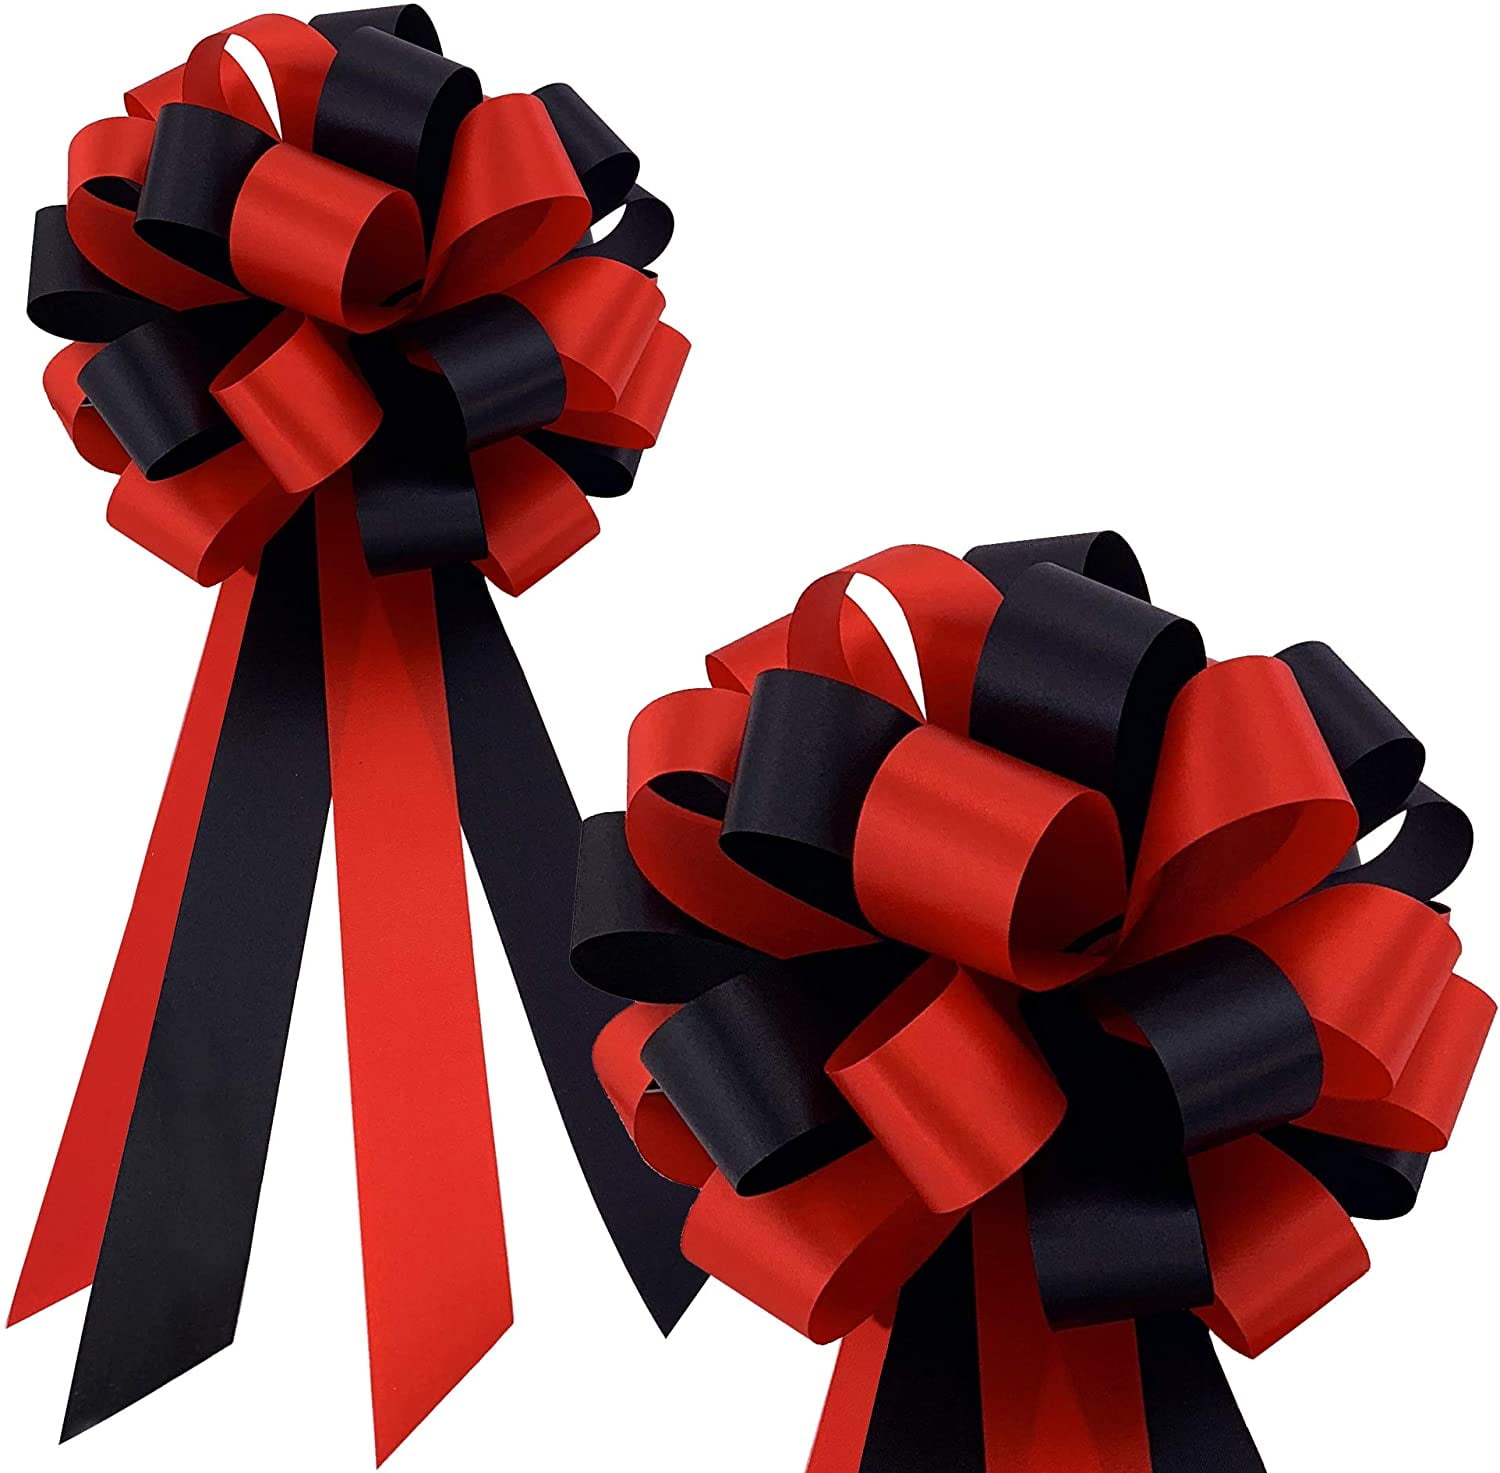 12 Pieces 1.2 Inch Big Red Pull Flower Ribbon - Gift Wrap - at 